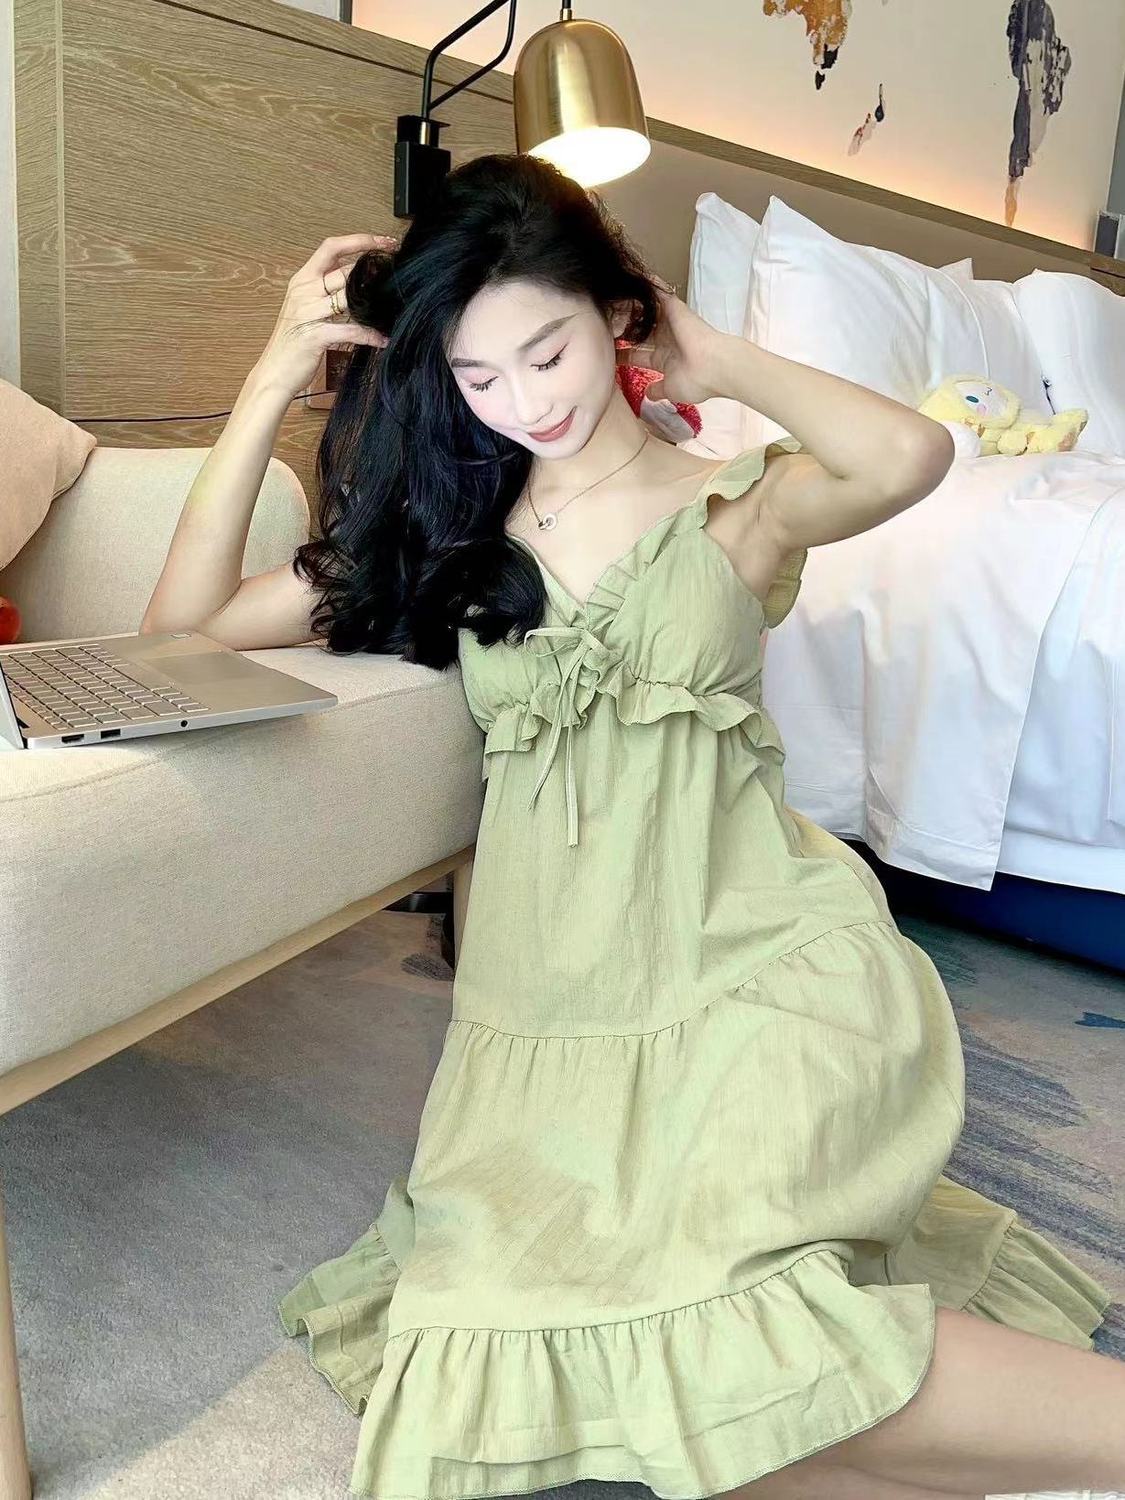 Pure cotton gauze nightdress women's summer pajamas with chest pad ins wind high value pure desire wind girl sweet maternity dress